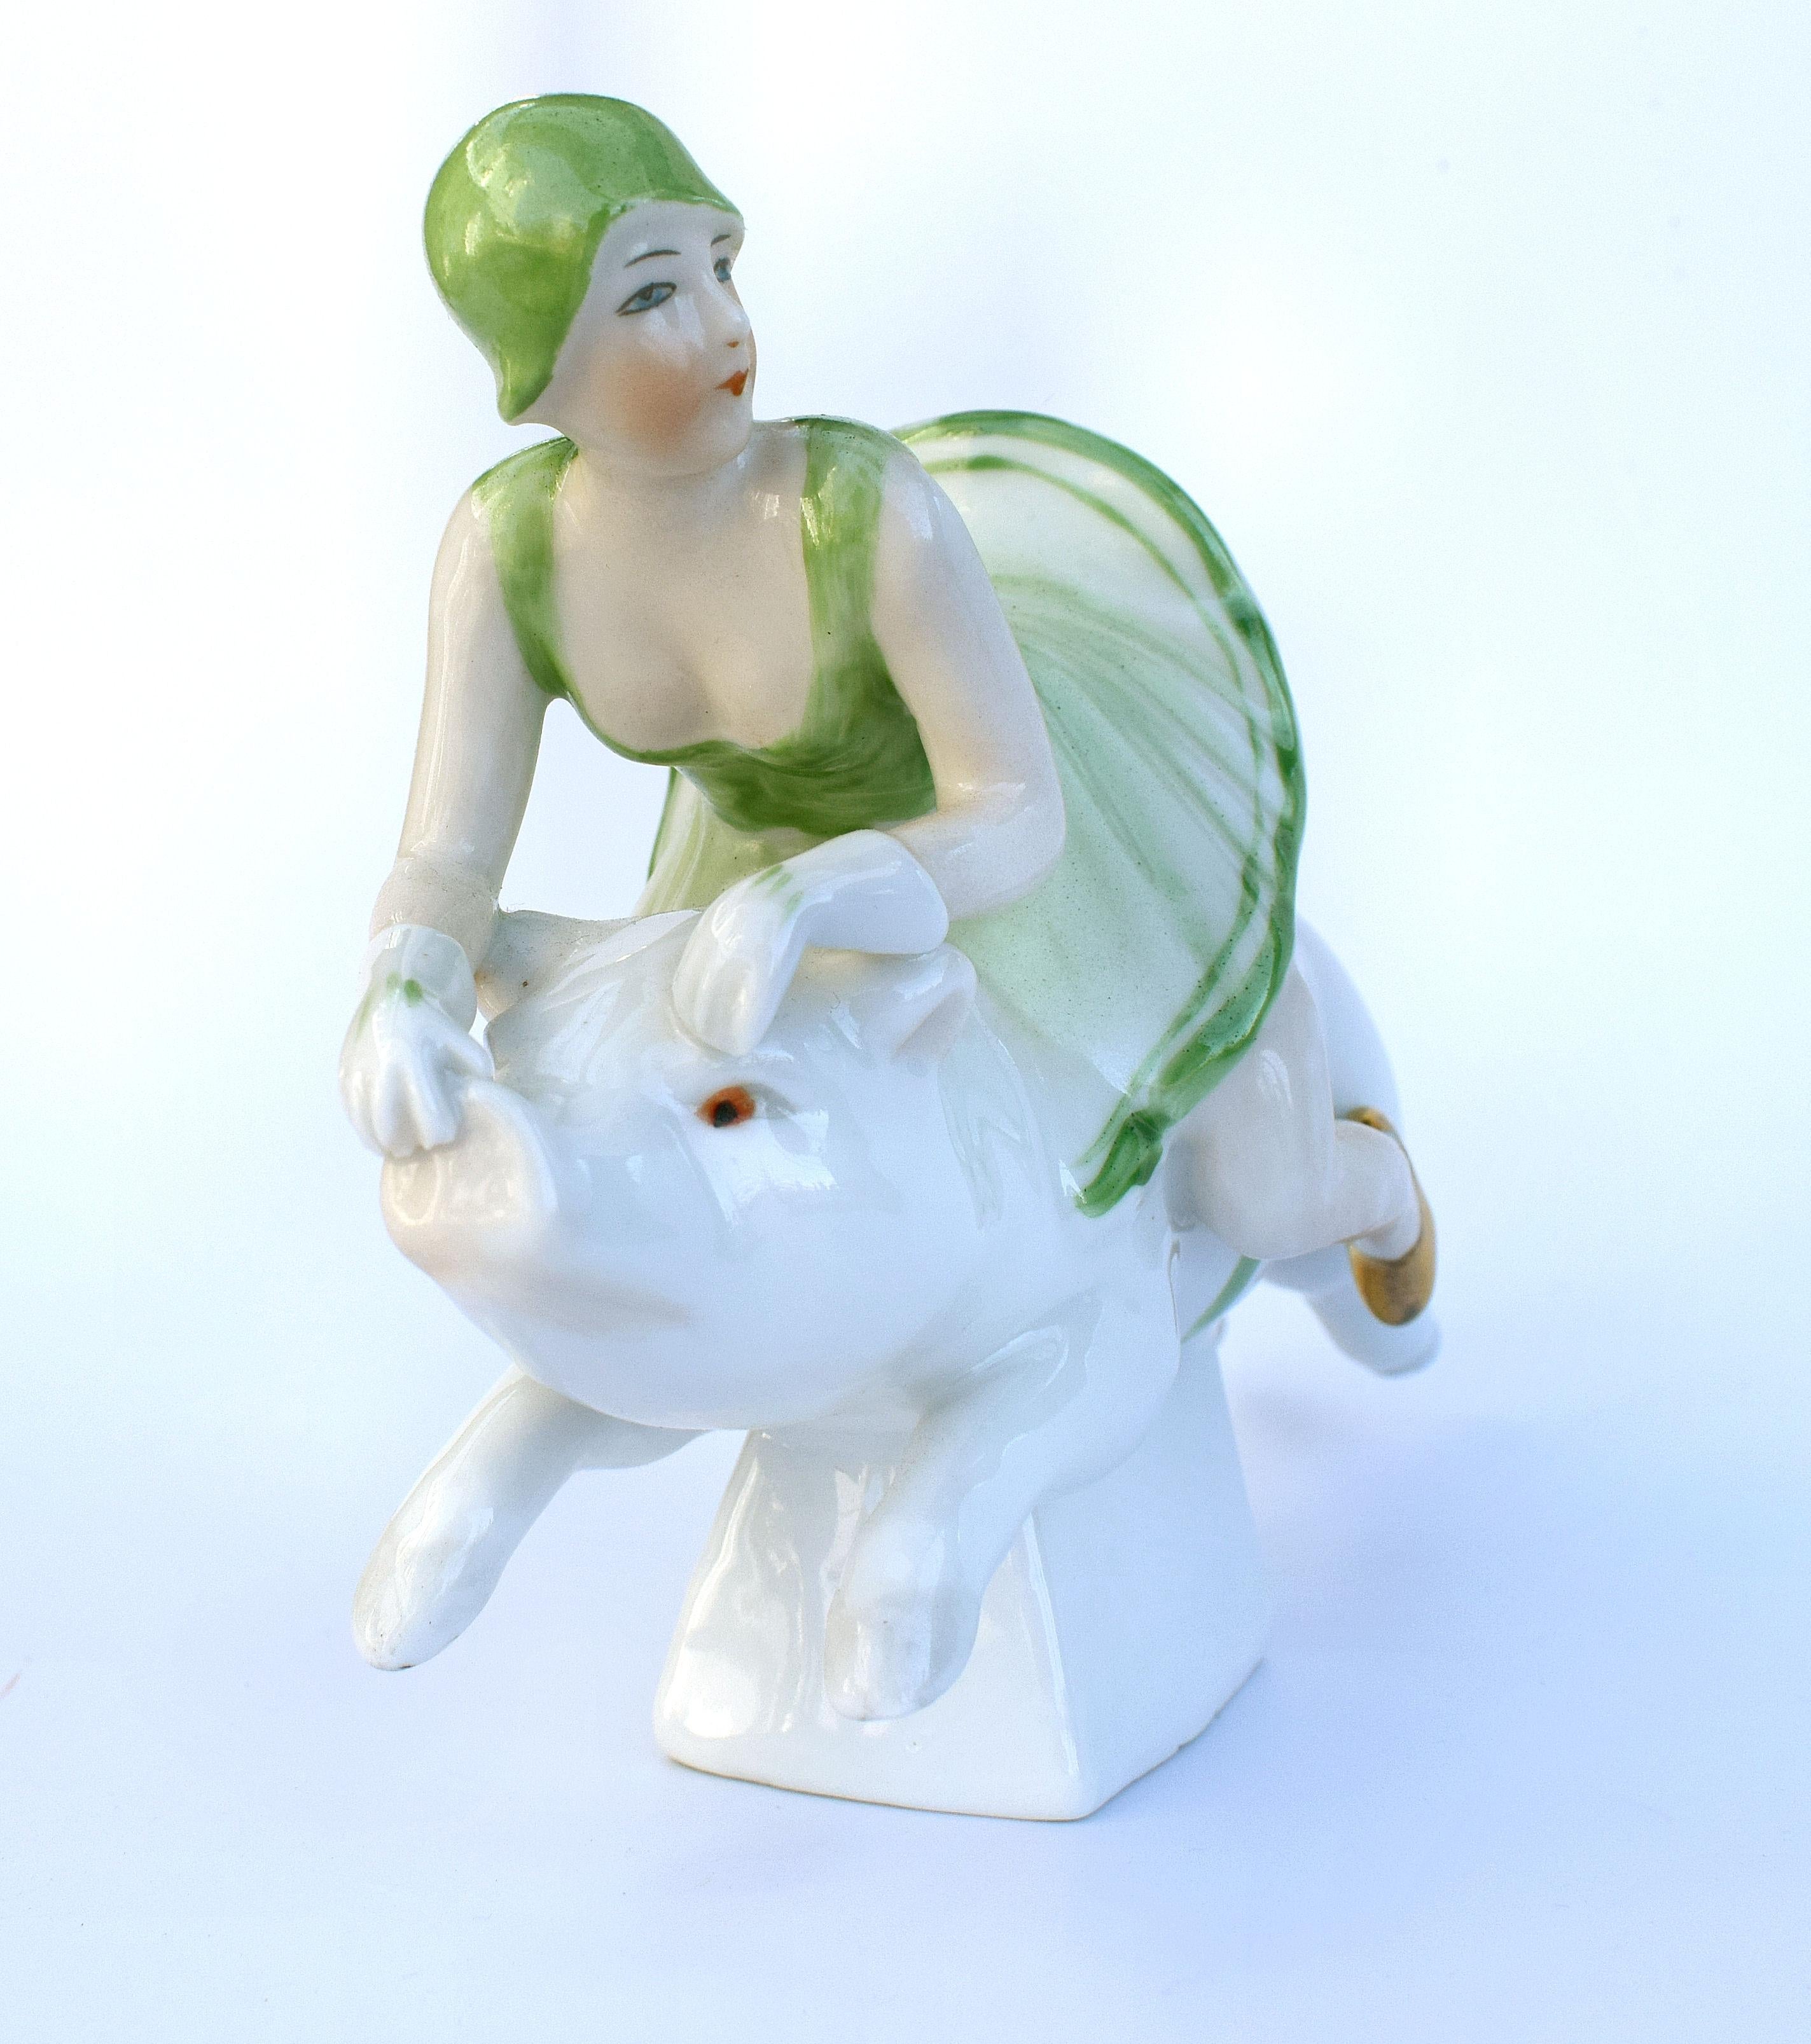 Part of the Half doll family is this novelty pin tray bowl which depicts a 1920's girl in the fashion of the day flying on the back of a pig. The detailing is superb and with humour as she uses the pigs snout as a grip. Lovely colouring pea green